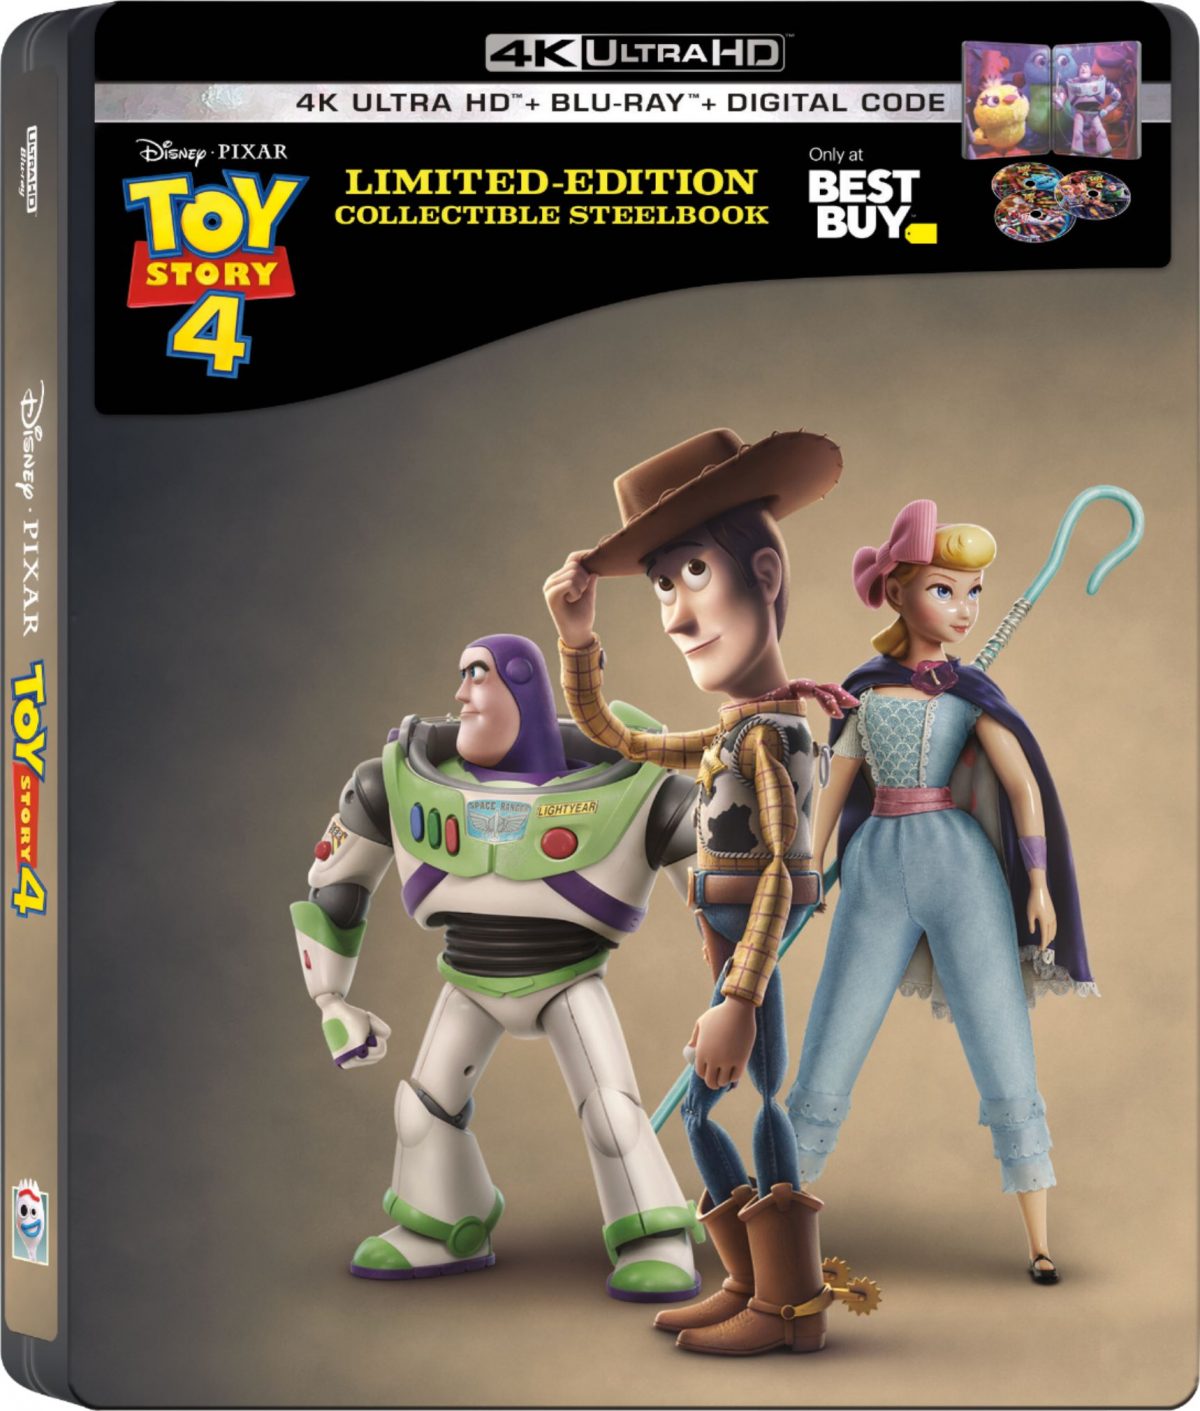 Check out Best Buy for all things Toy Story 4